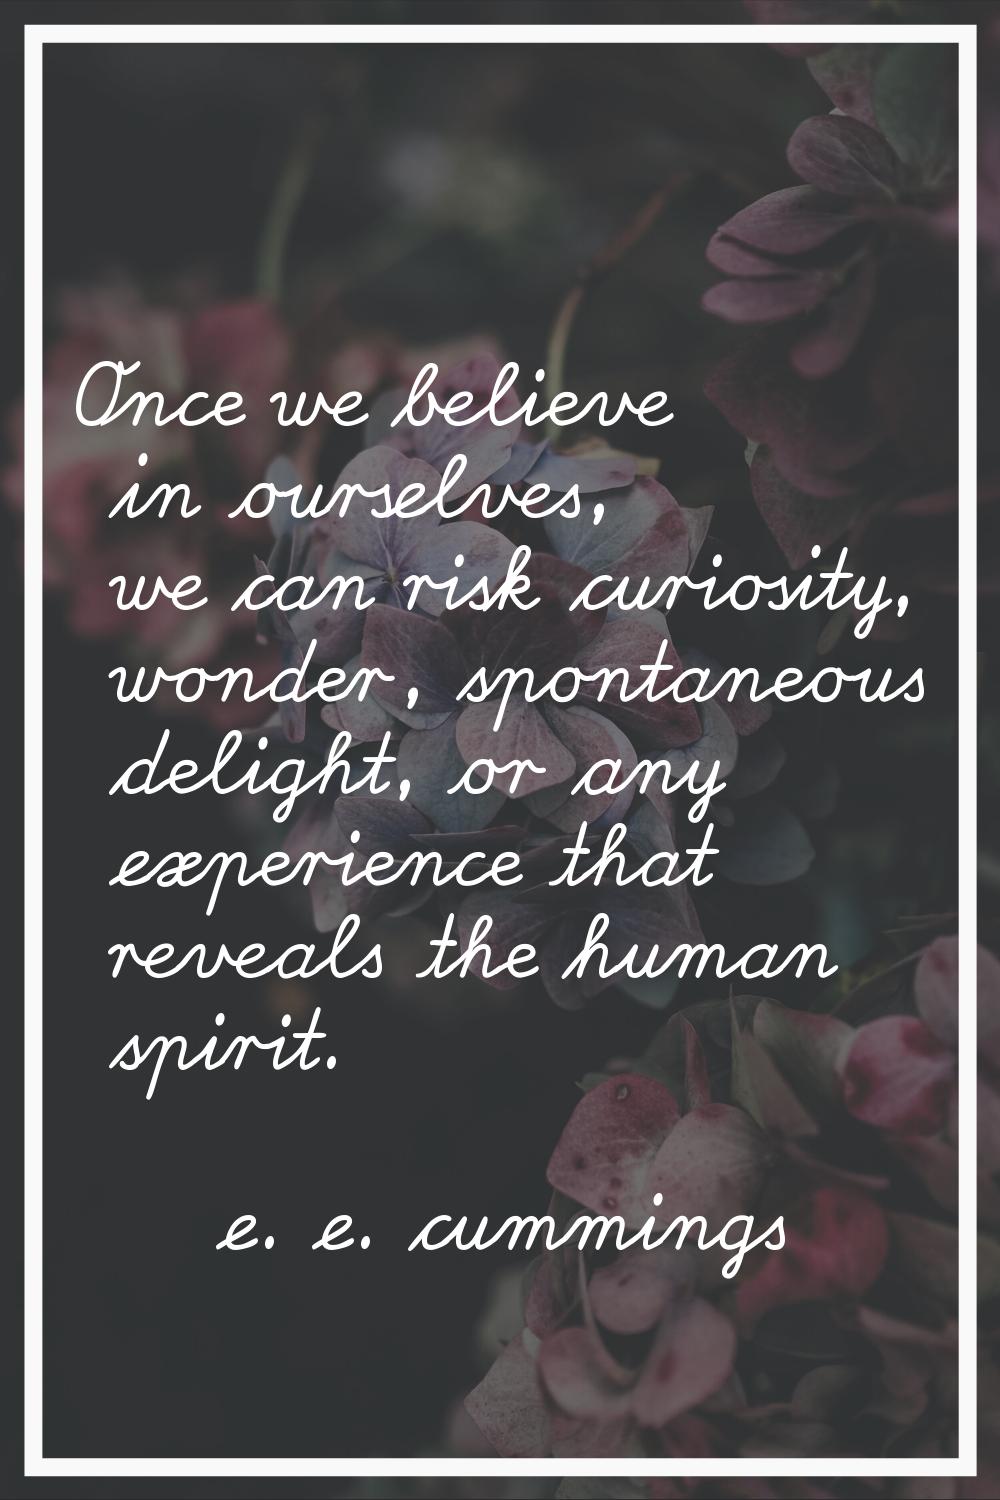 Once we believe in ourselves, we can risk curiosity, wonder, spontaneous delight, or any experience